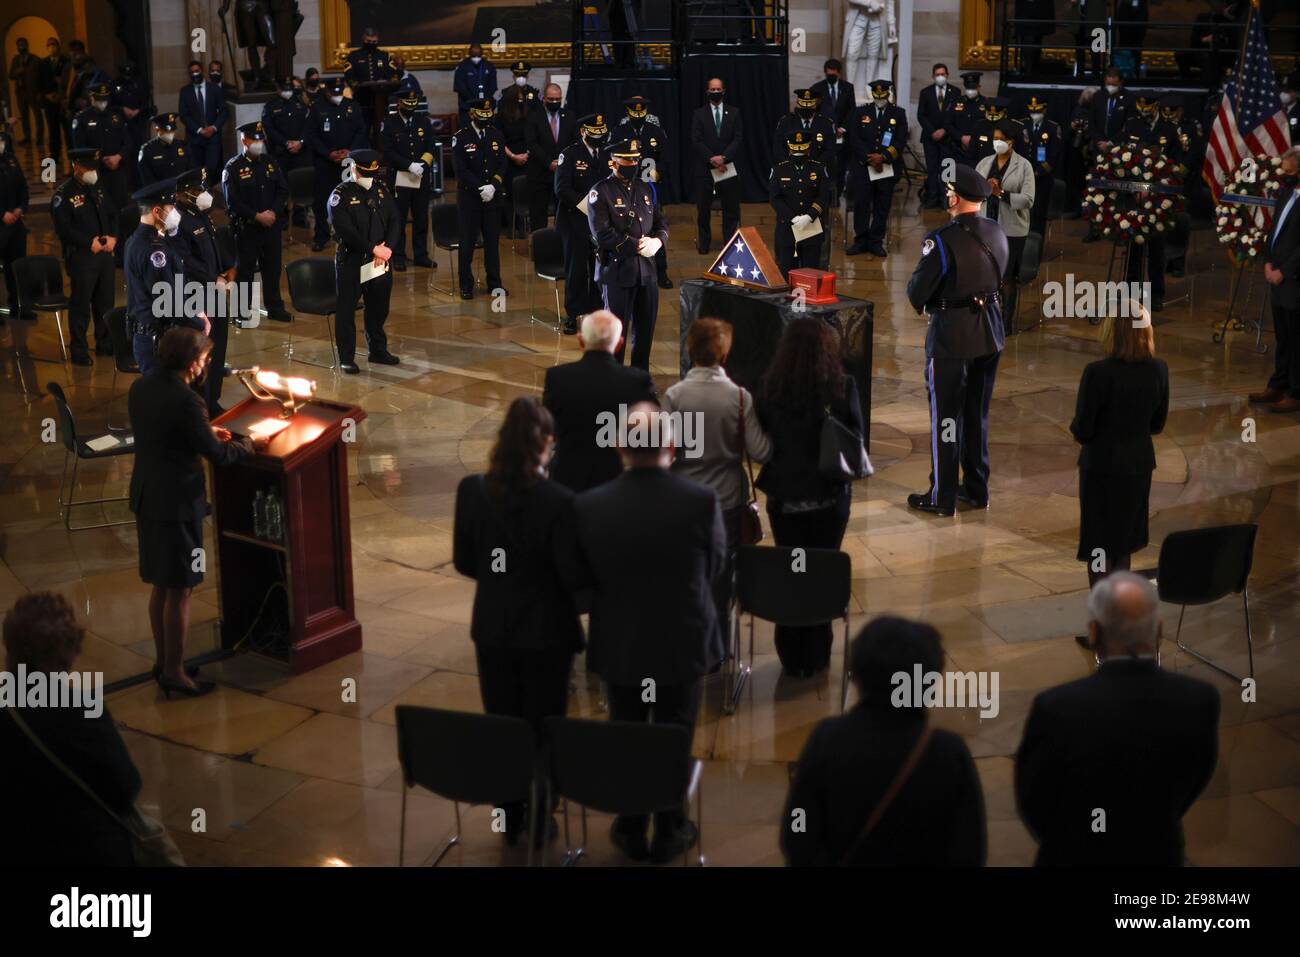 Washigton, USA. 29th Jan, 2021. A view of the ceremony for late Capitol Police officer Brian Sicknick as he lies in honor in the Rotunda of the U.S. Capitol in Washington, U.S. February 3, 2021. (Photo by Carlos Barria/Pool/Sipa USA) Credit: Sipa USA/Alamy Live News Stock Photo